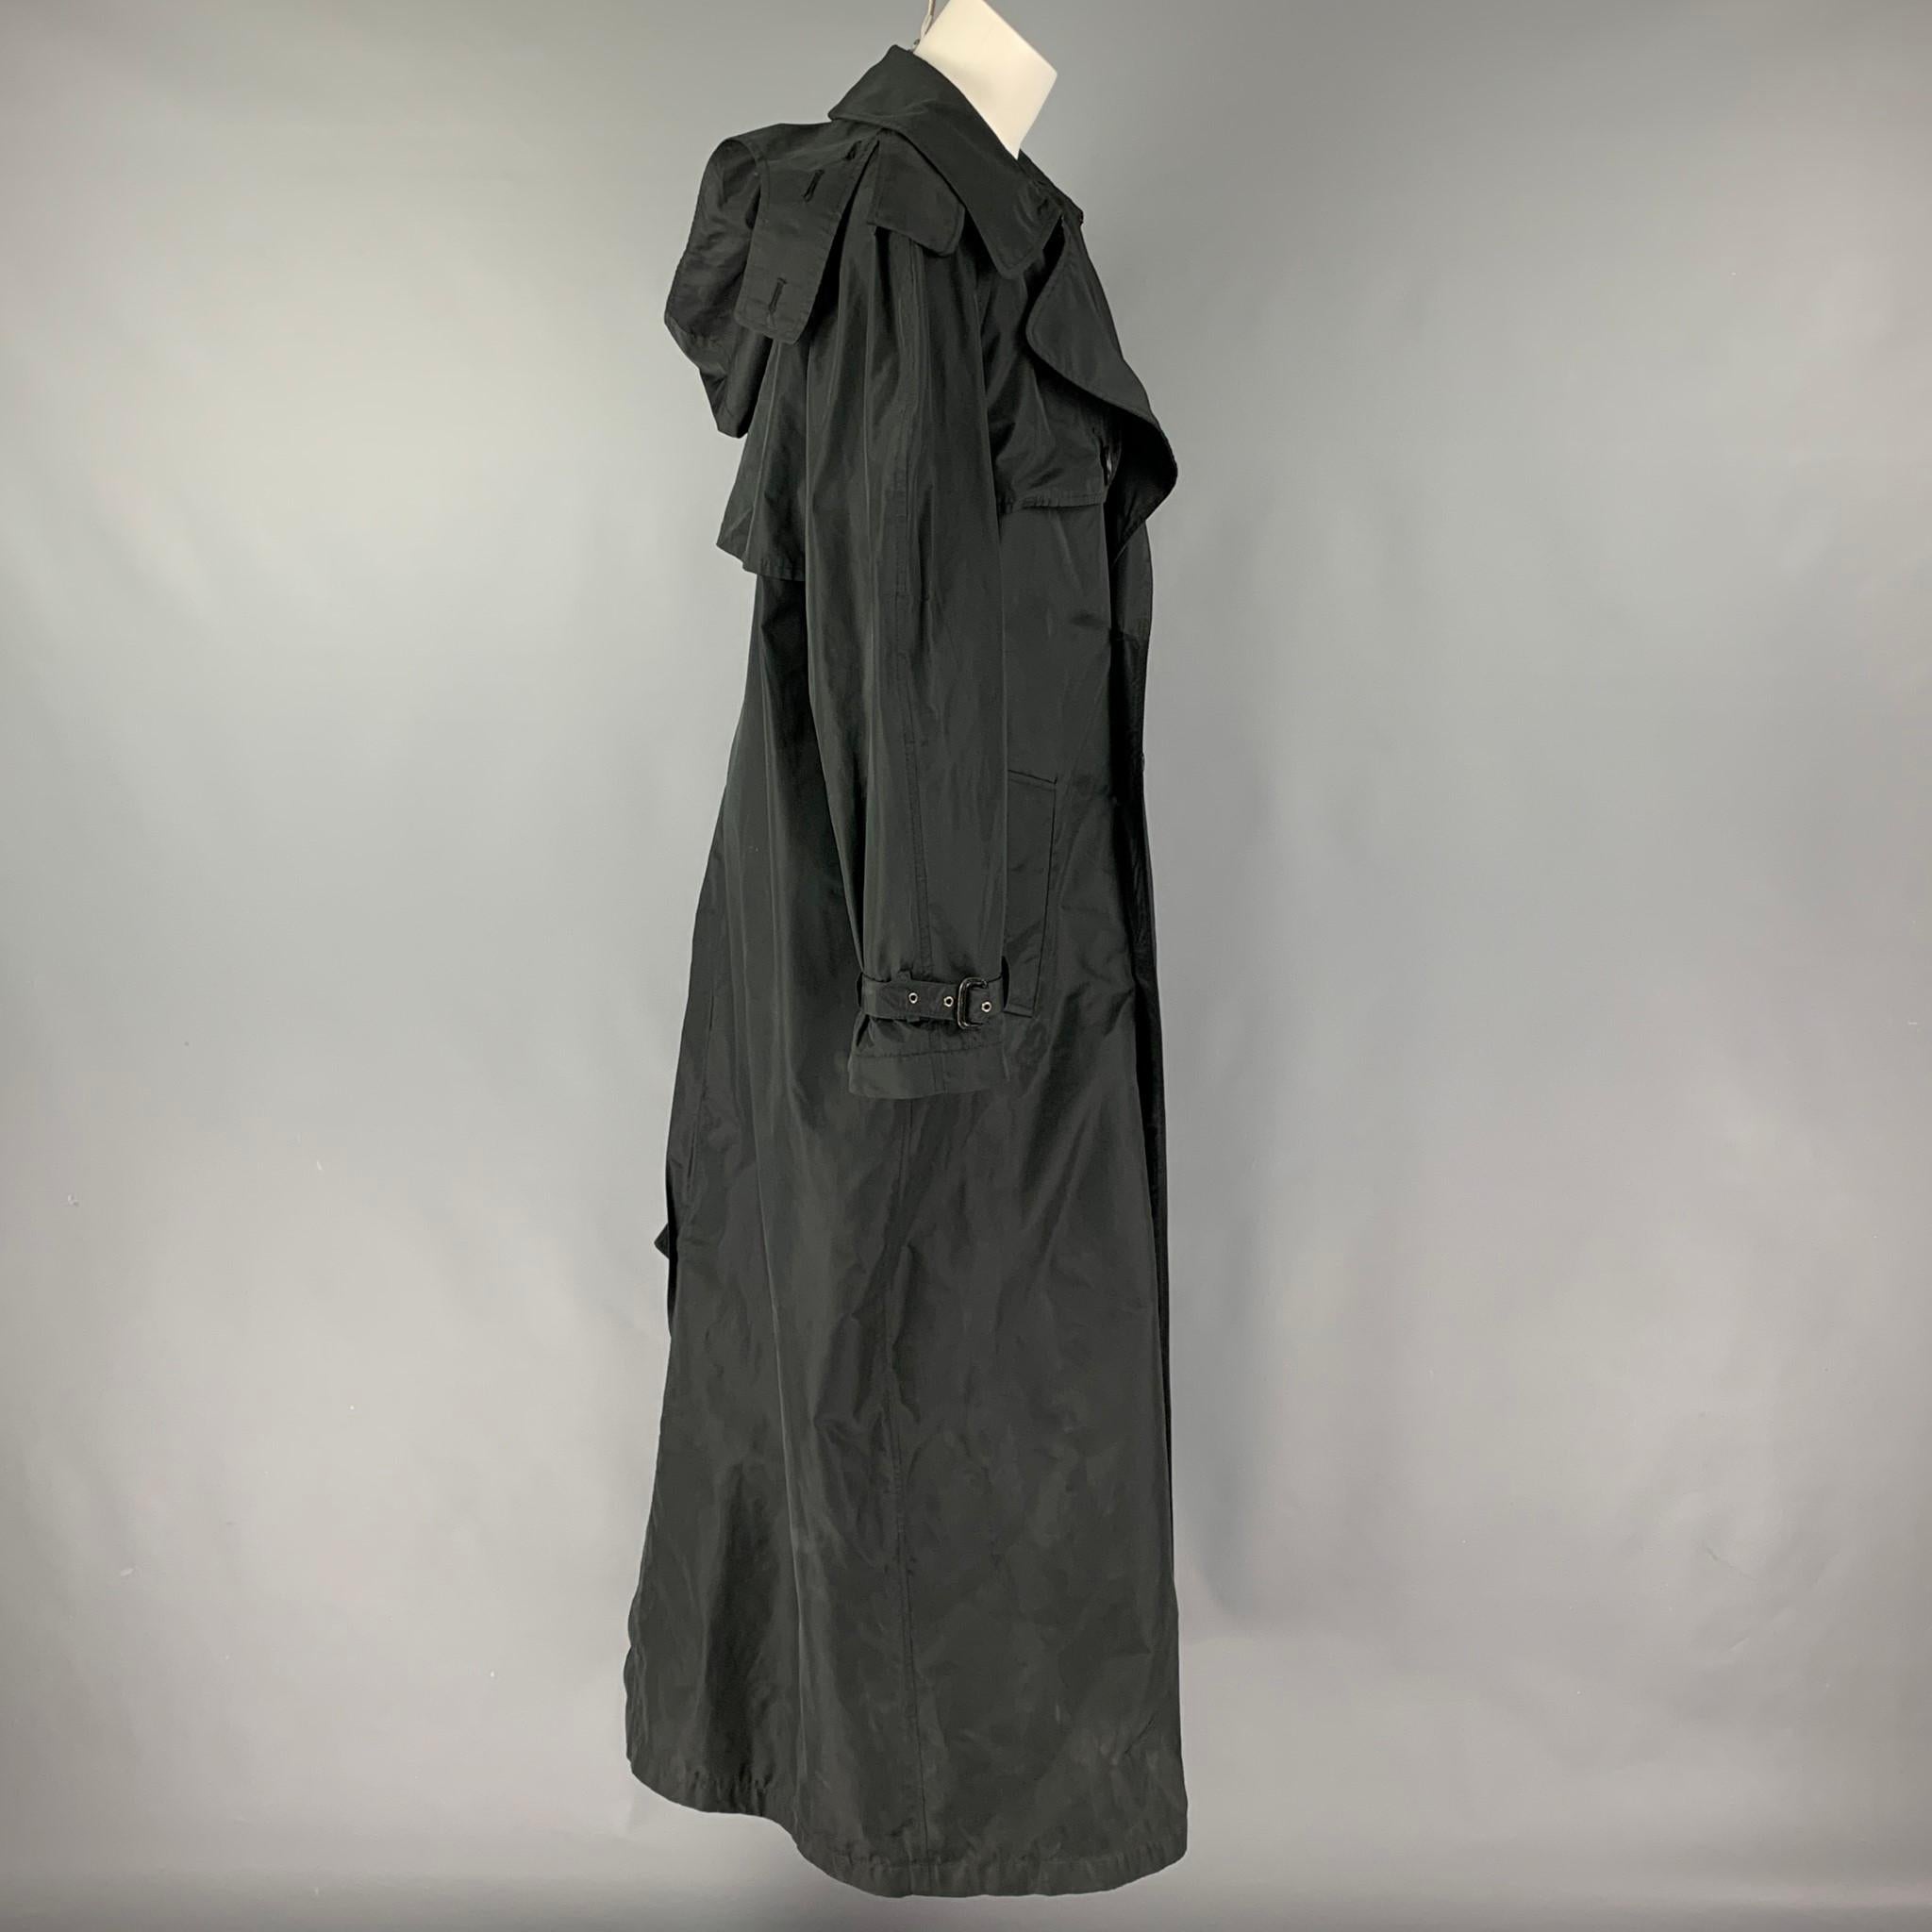 JEAN PAUL GAULTIER coat comes in a black polyester / silk featuring a large lapel, slit pockets, belted sleeve details, hooded, and a double breasted closure. Missing Belt. Made in Italy. 

Very Good Pre-Owned Condition.
Marked: I 42 / D 38 / F 38 /